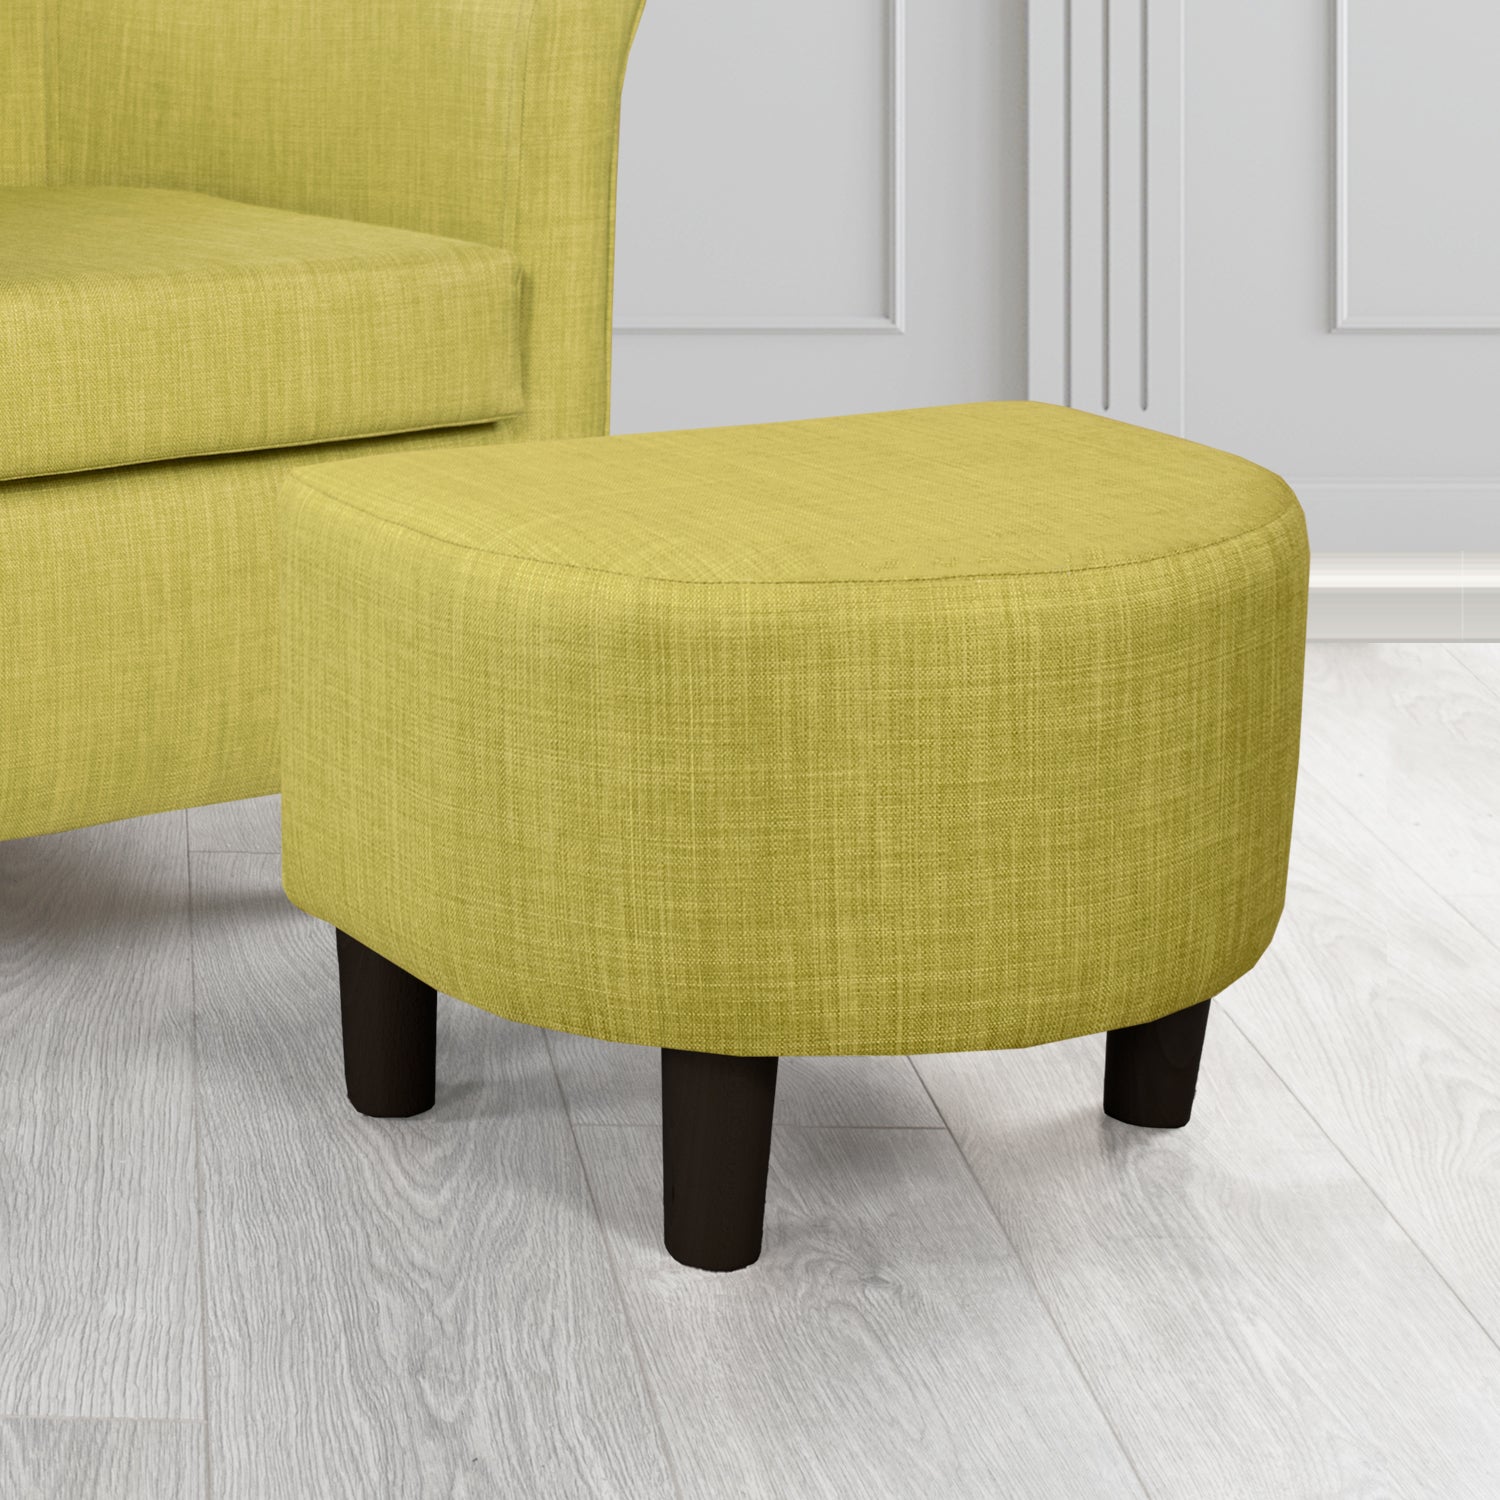 Tuscany Charles Olive Plain Linen Fabric Footstool - The Tub Chair Shop